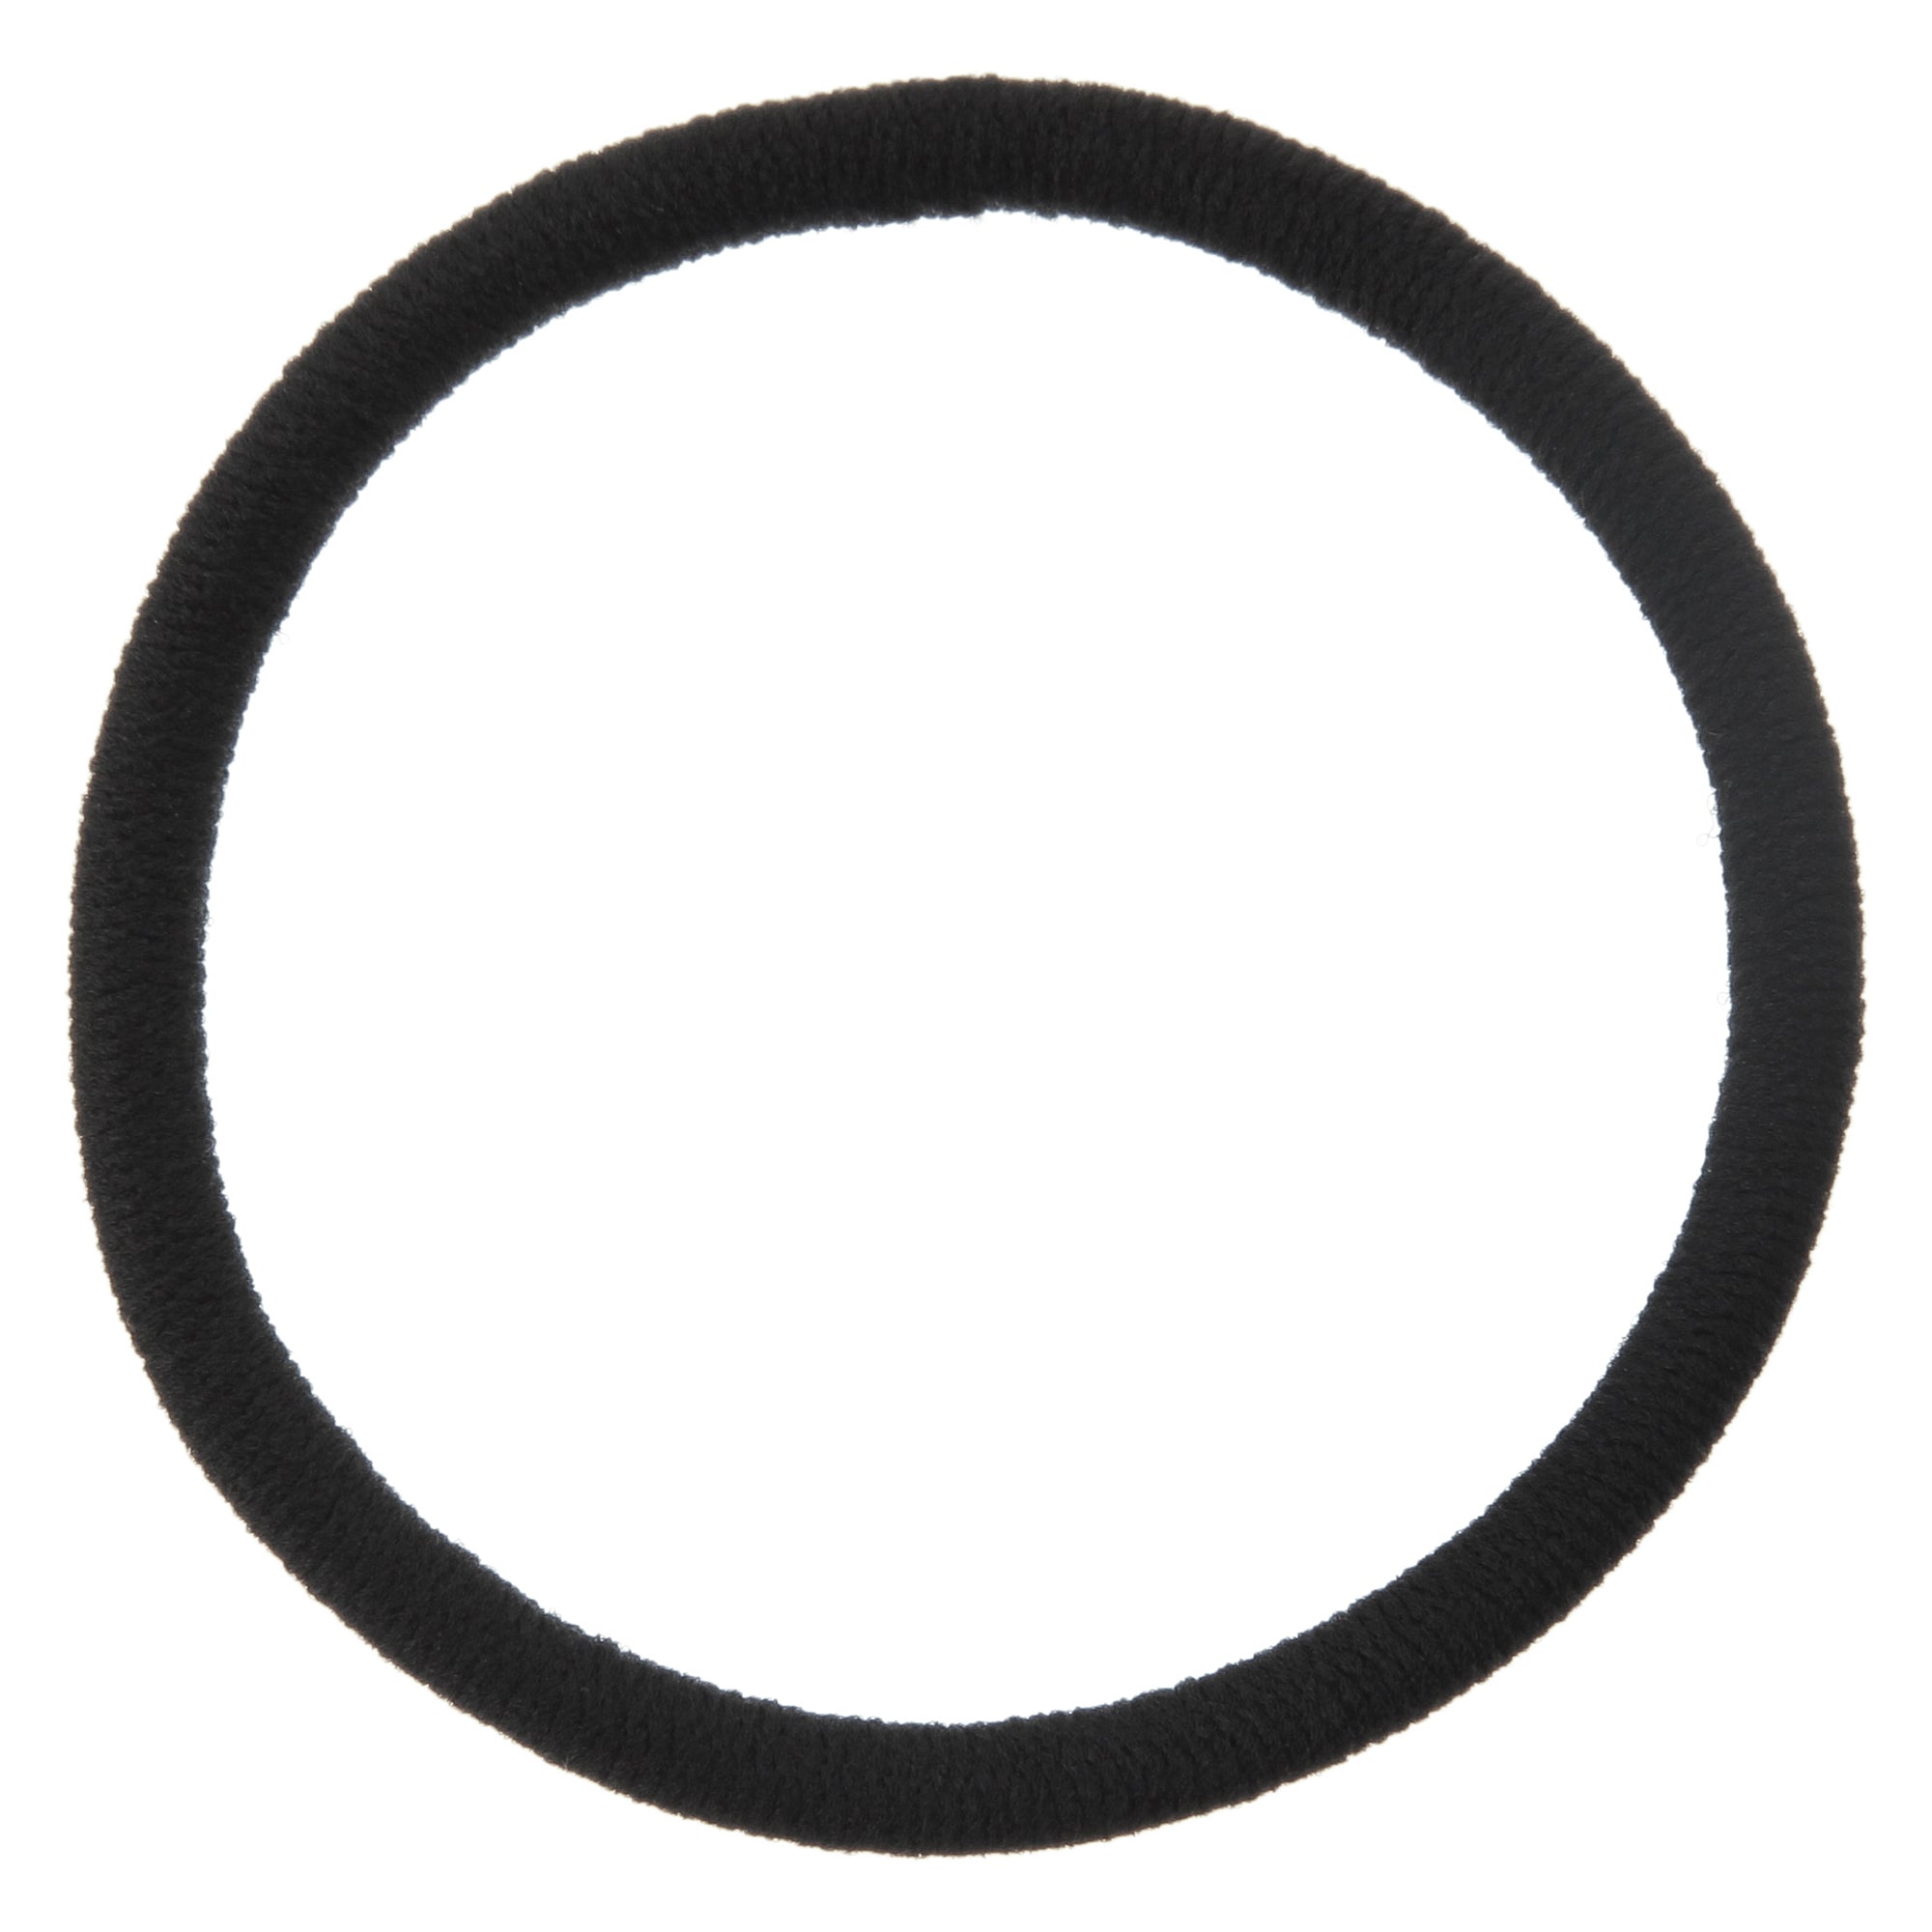 Rubber Hair Band Thick (1pc)